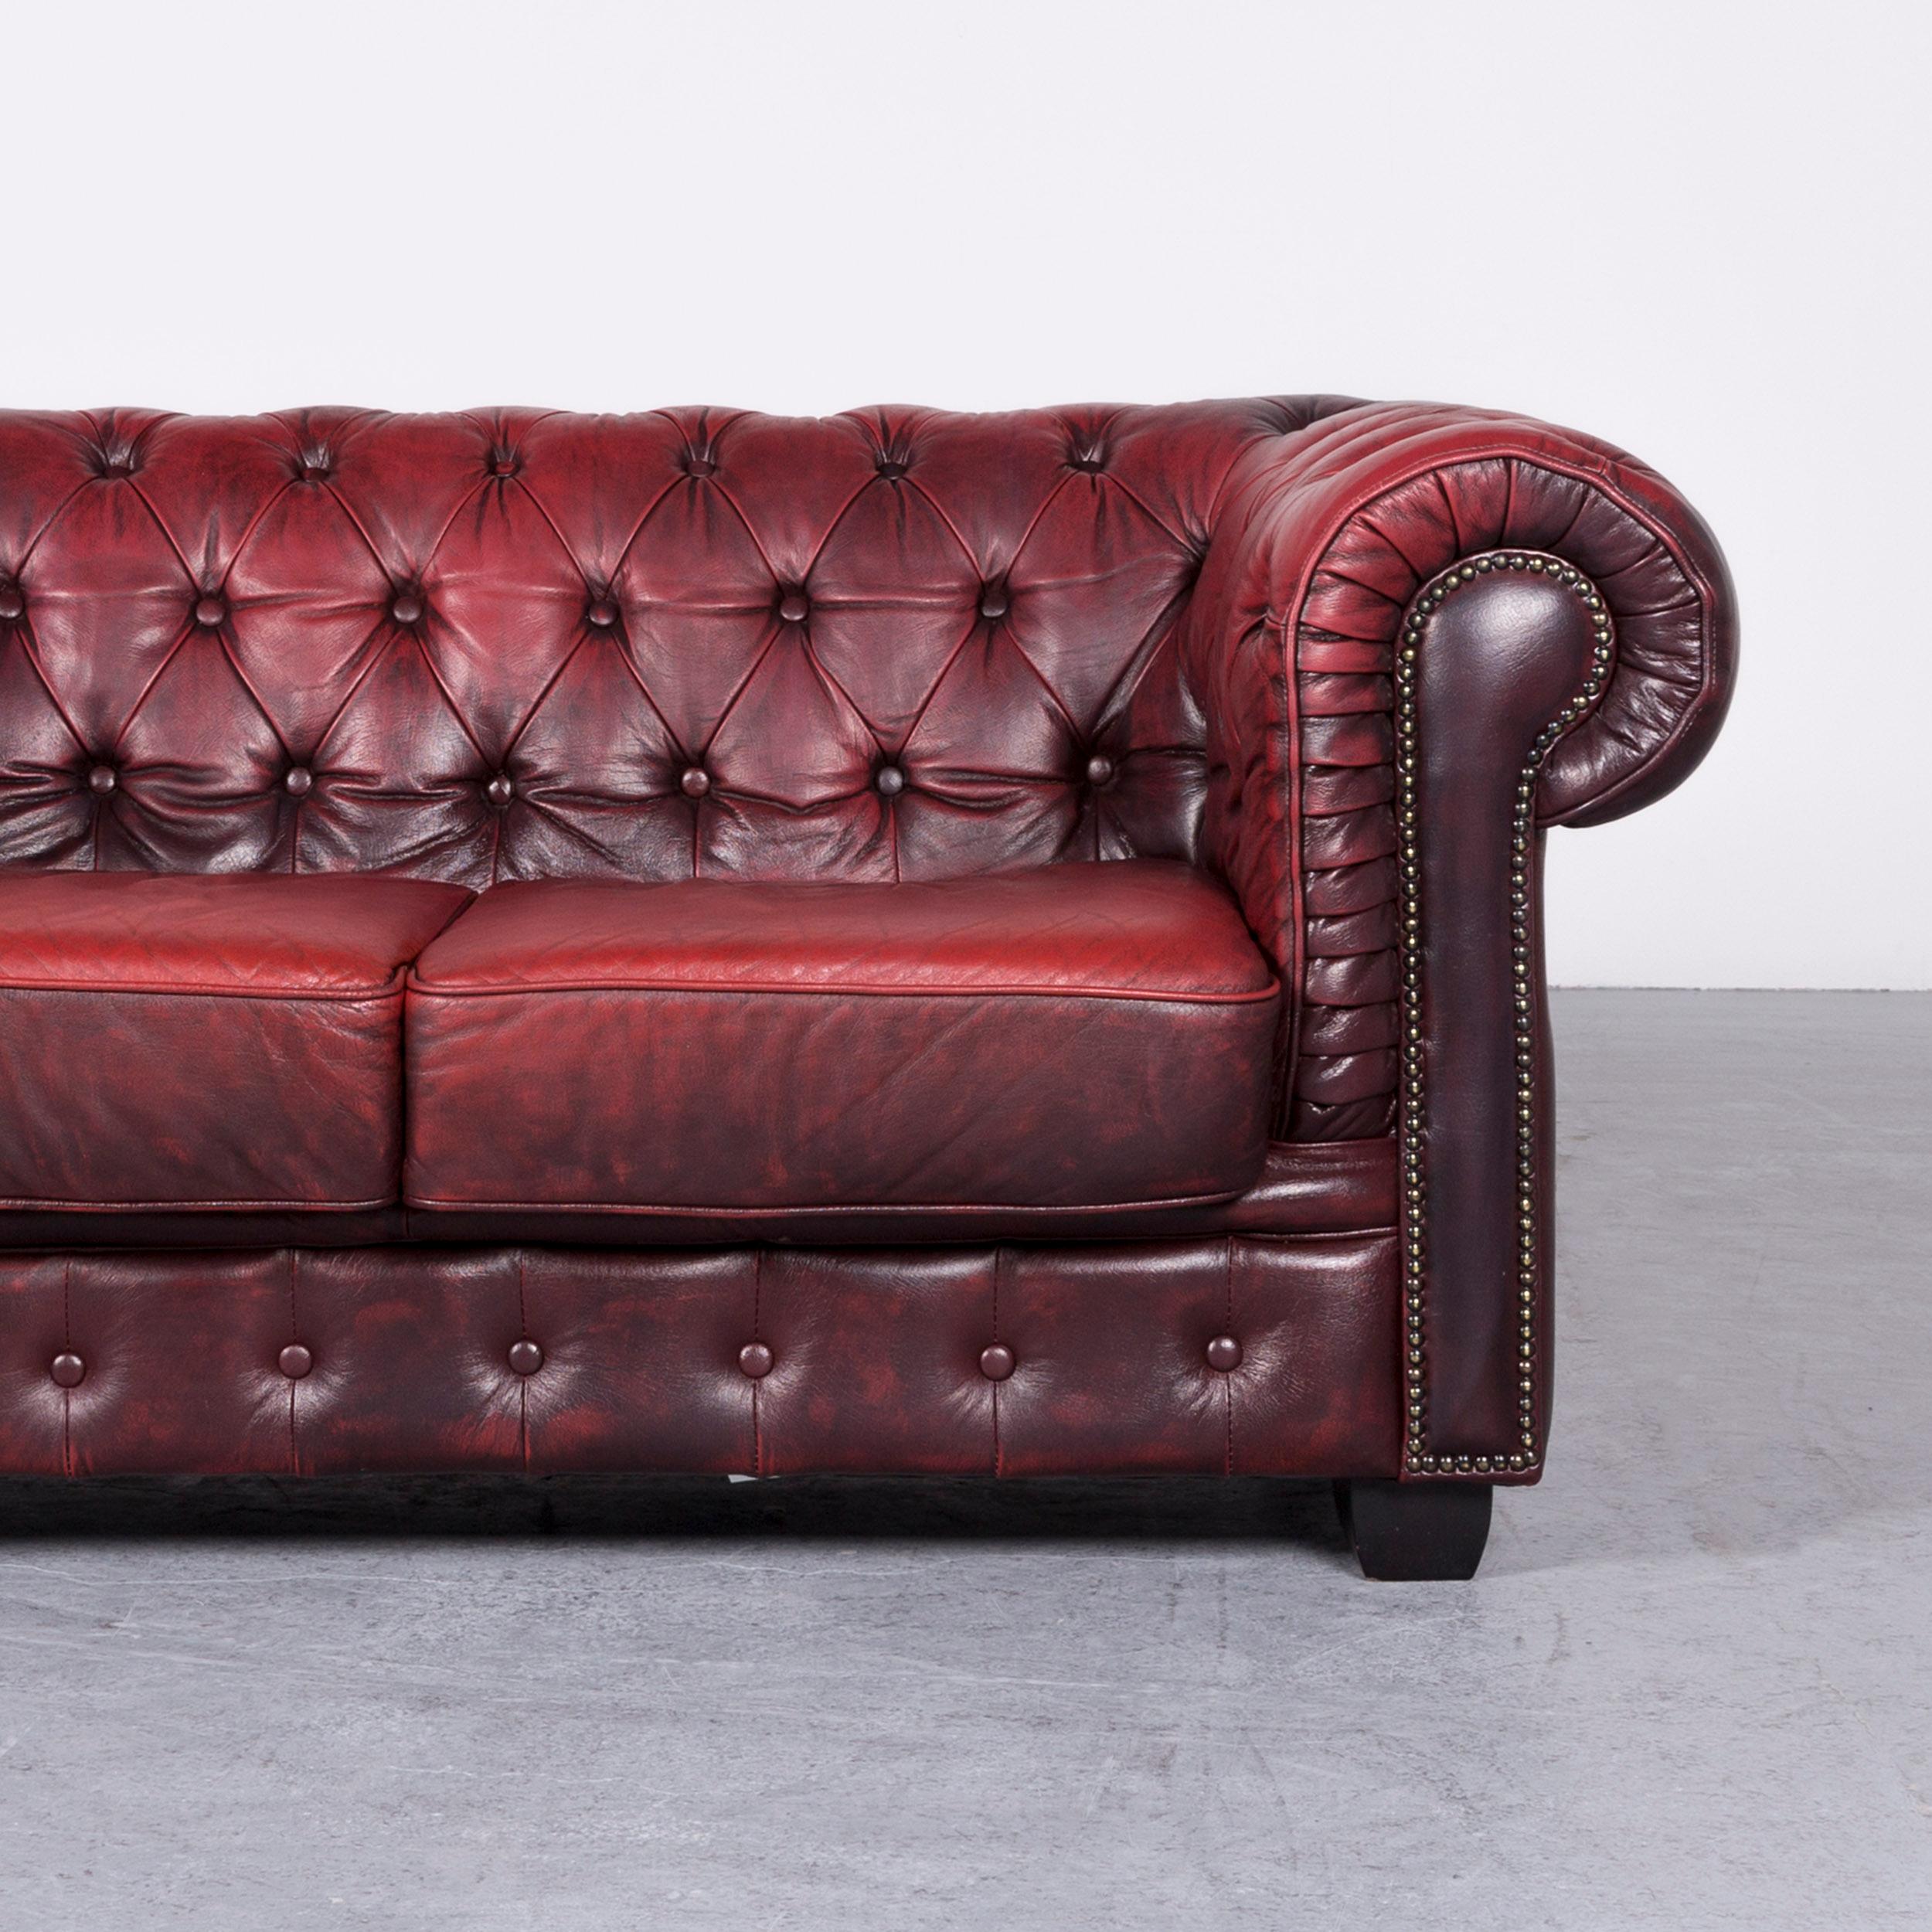 Contemporary Chesterfield Leather Sofa Red Two-Seat Vintage Couch